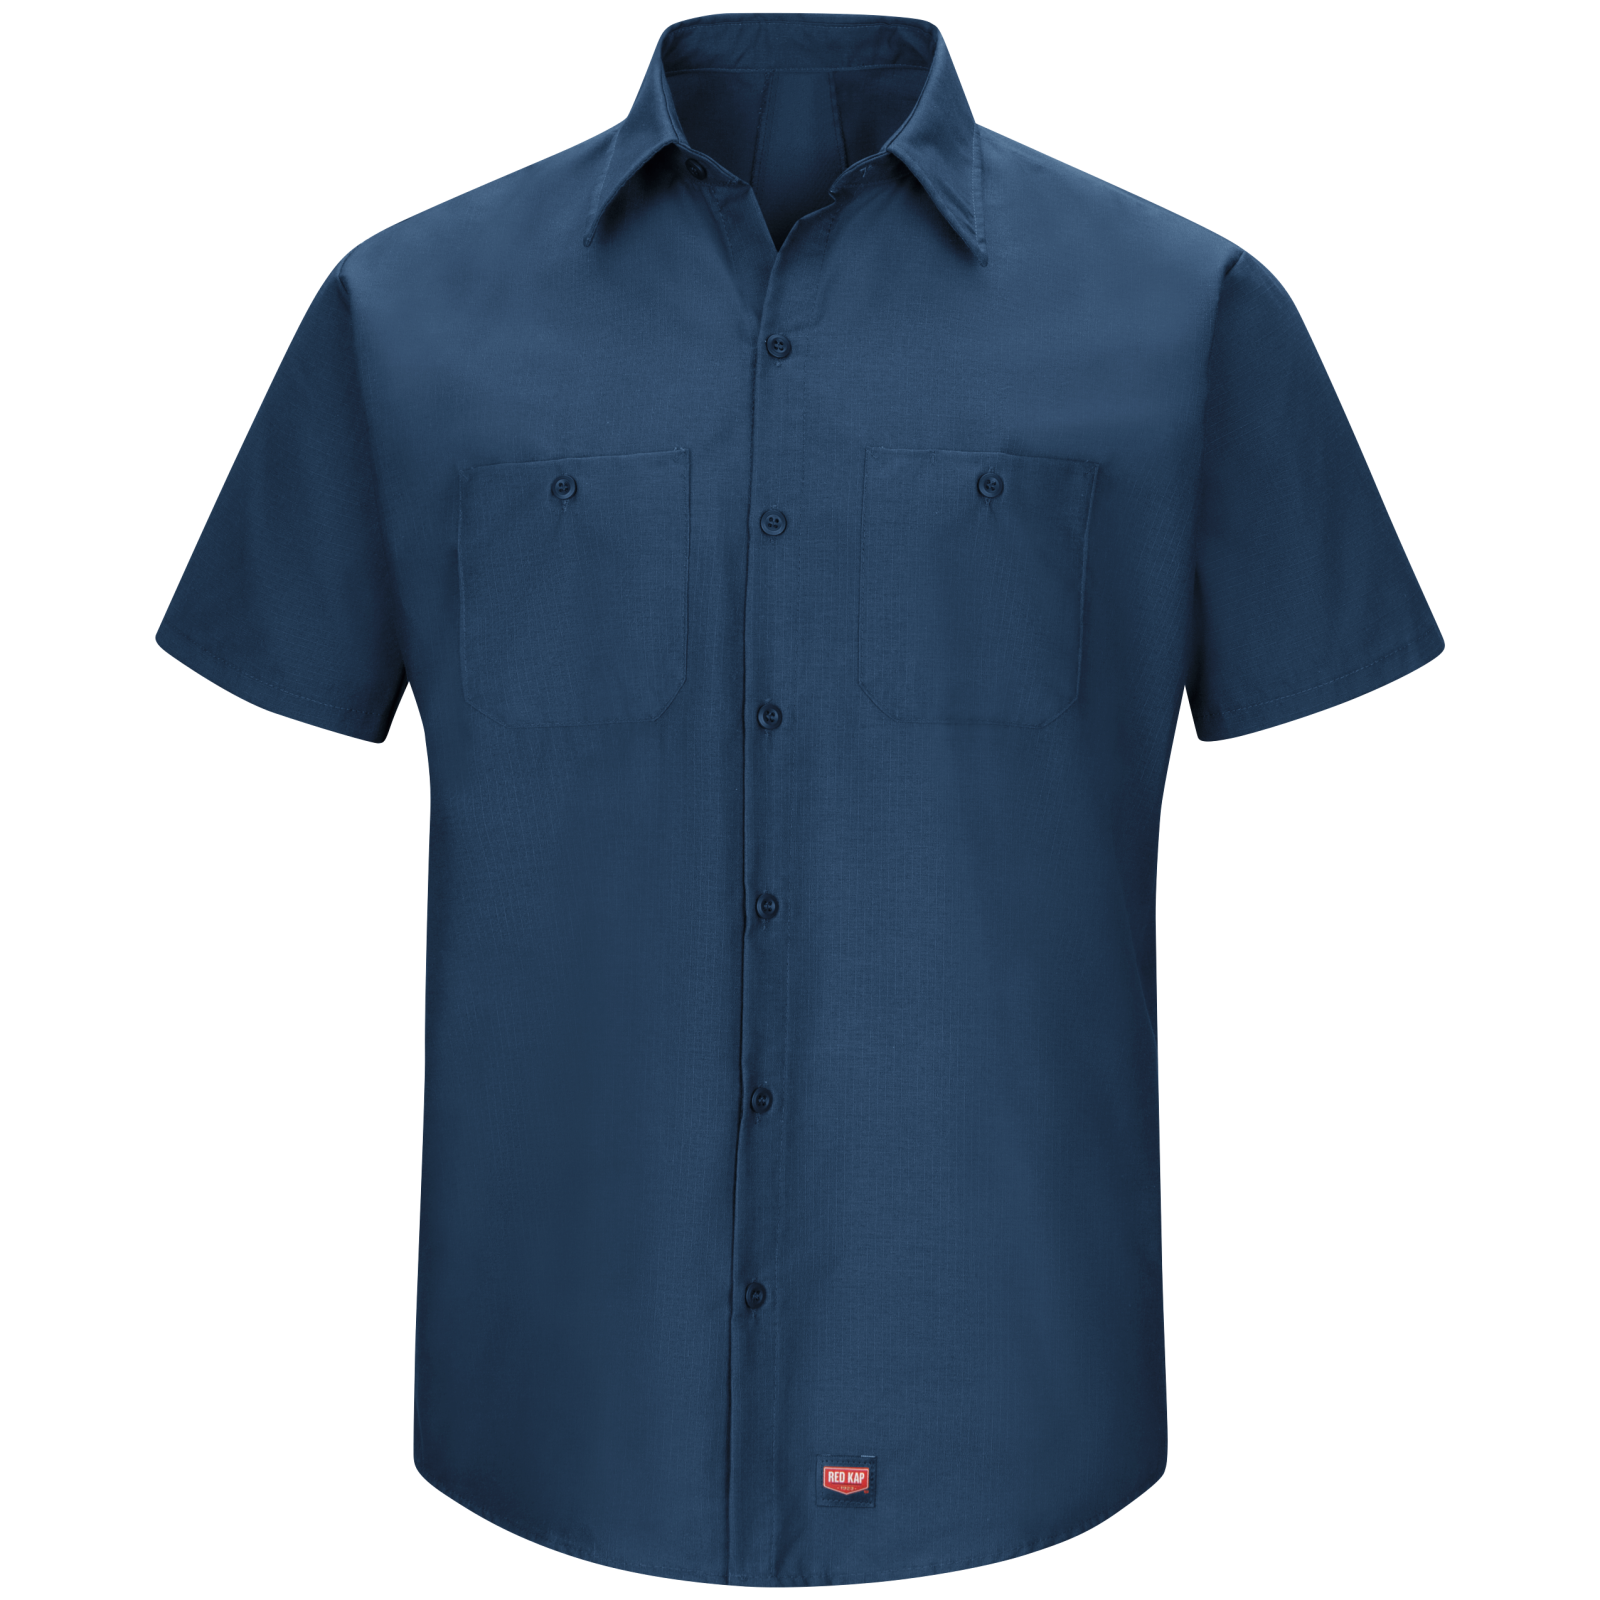 Men's Short Sleeve Work Shirt | Available in Multiple Colors | Red Kap ...